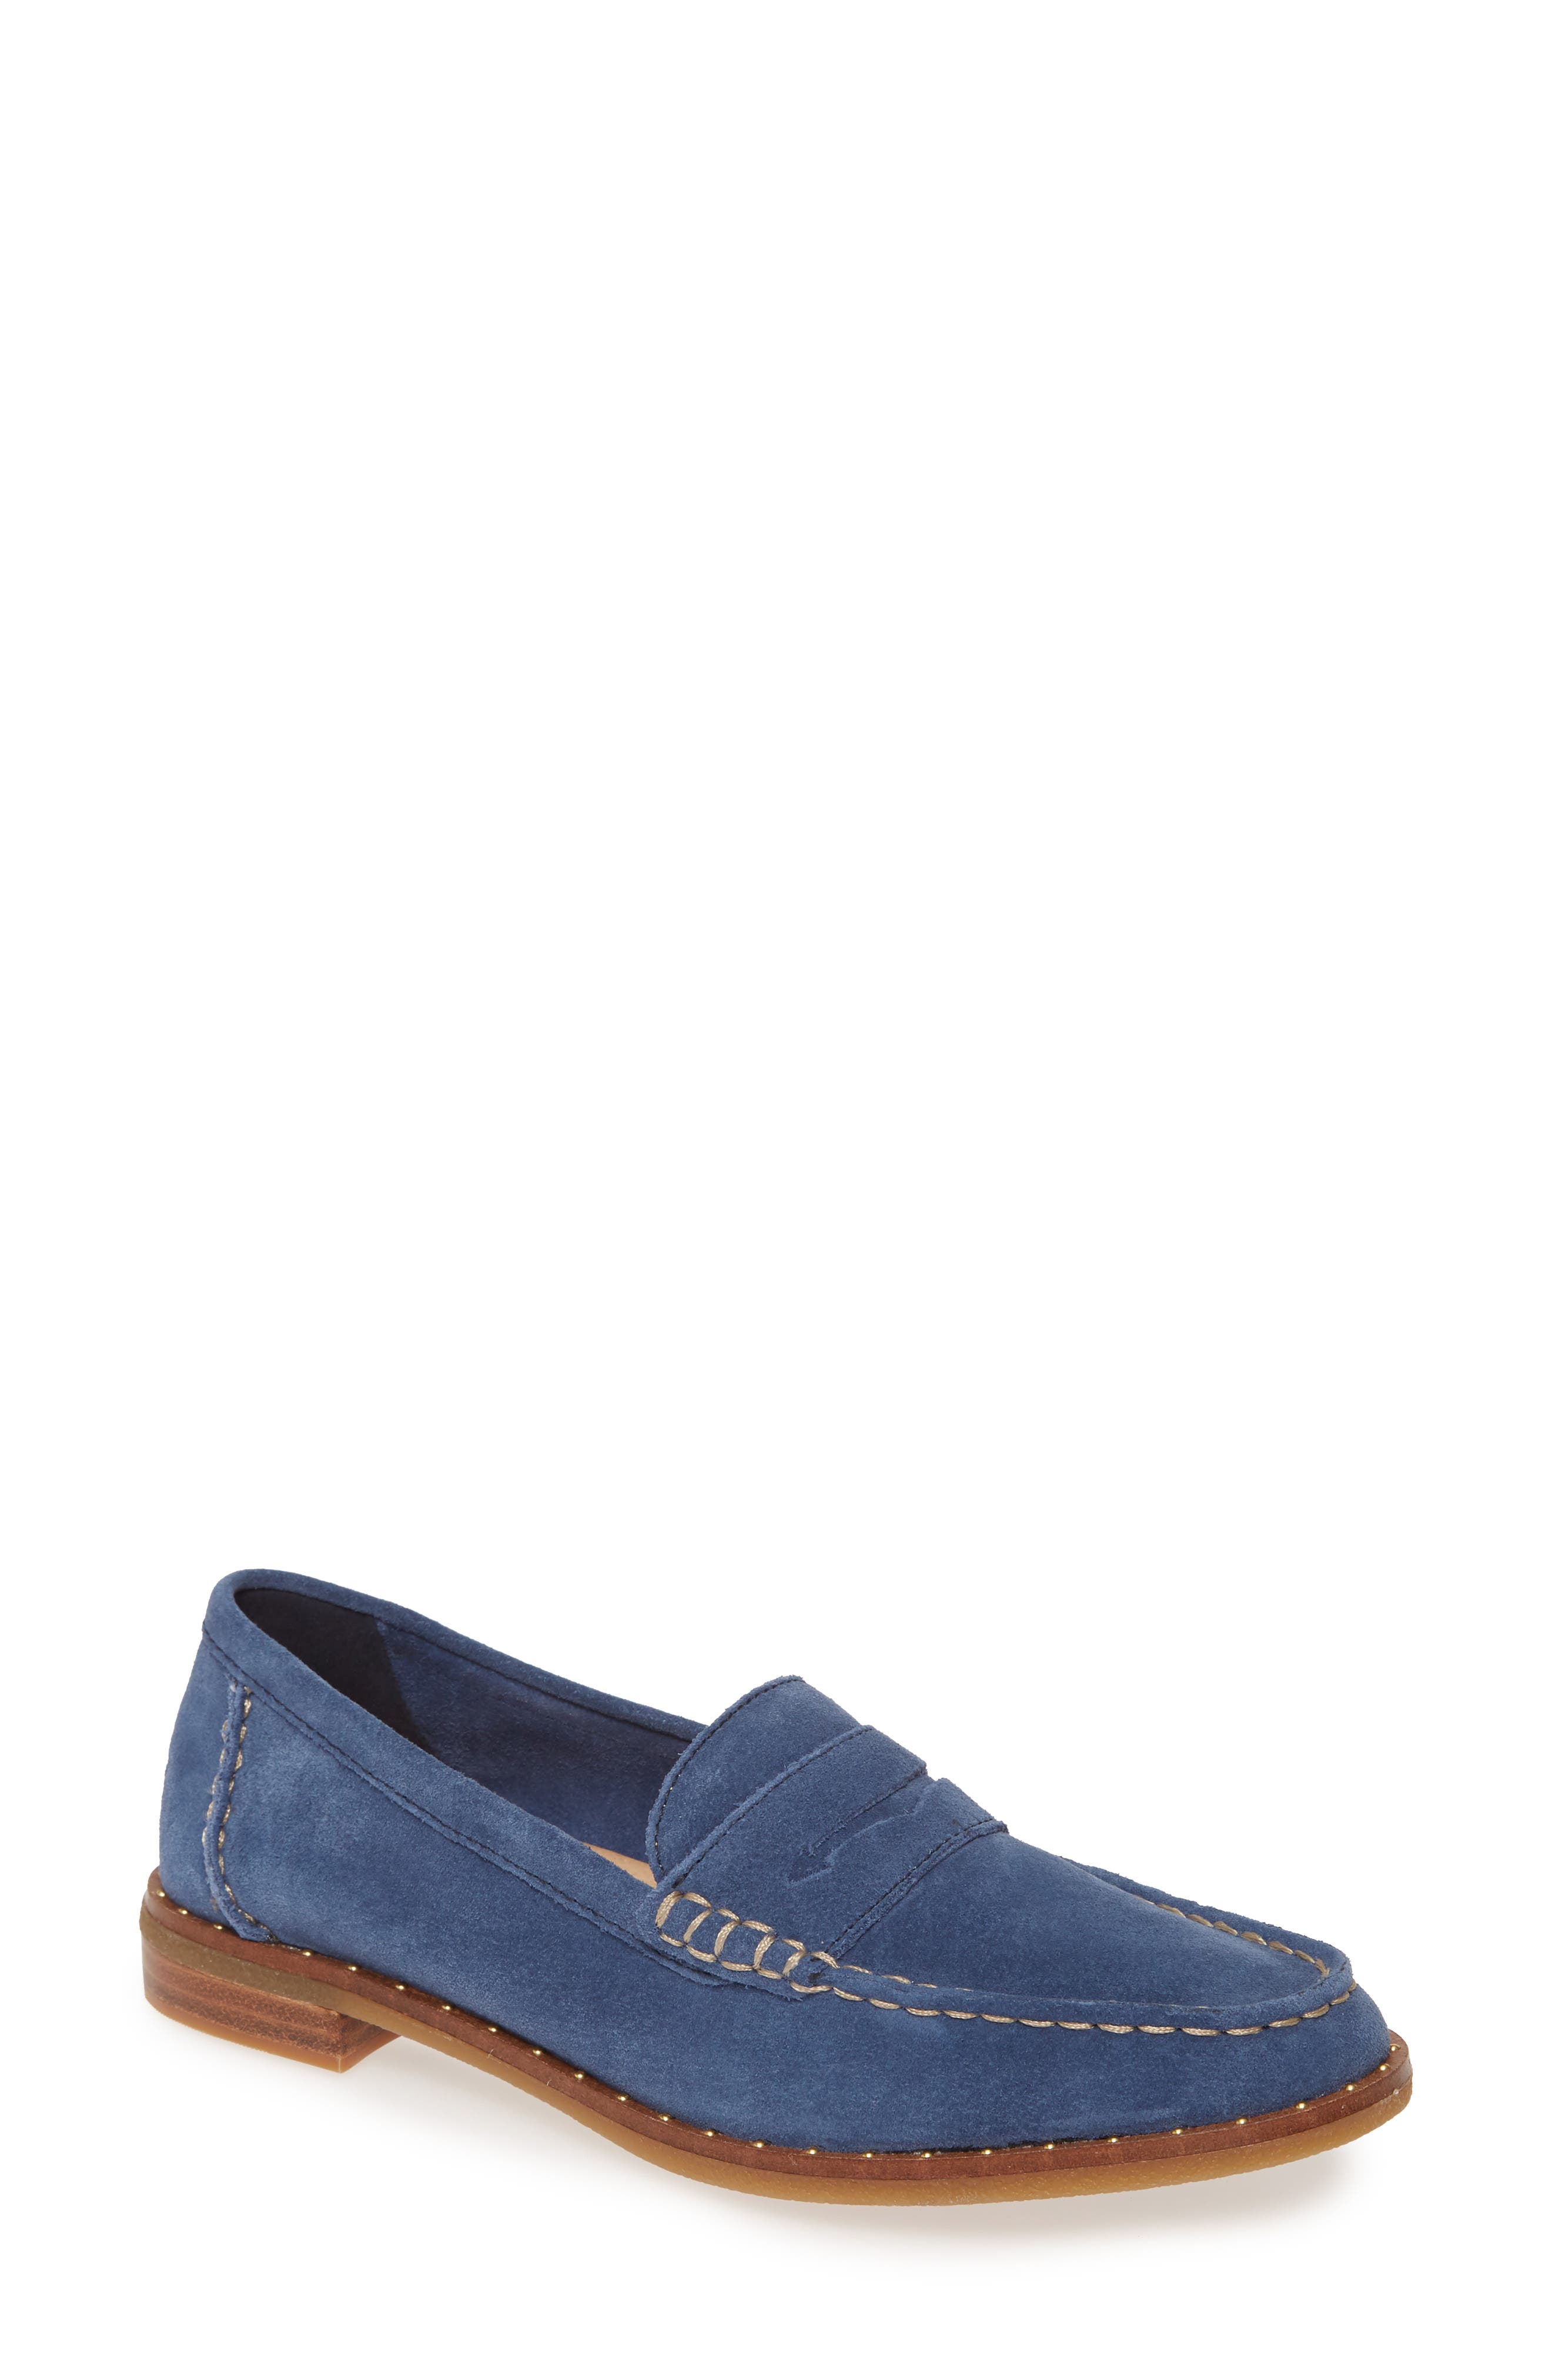 seaport penny loafer